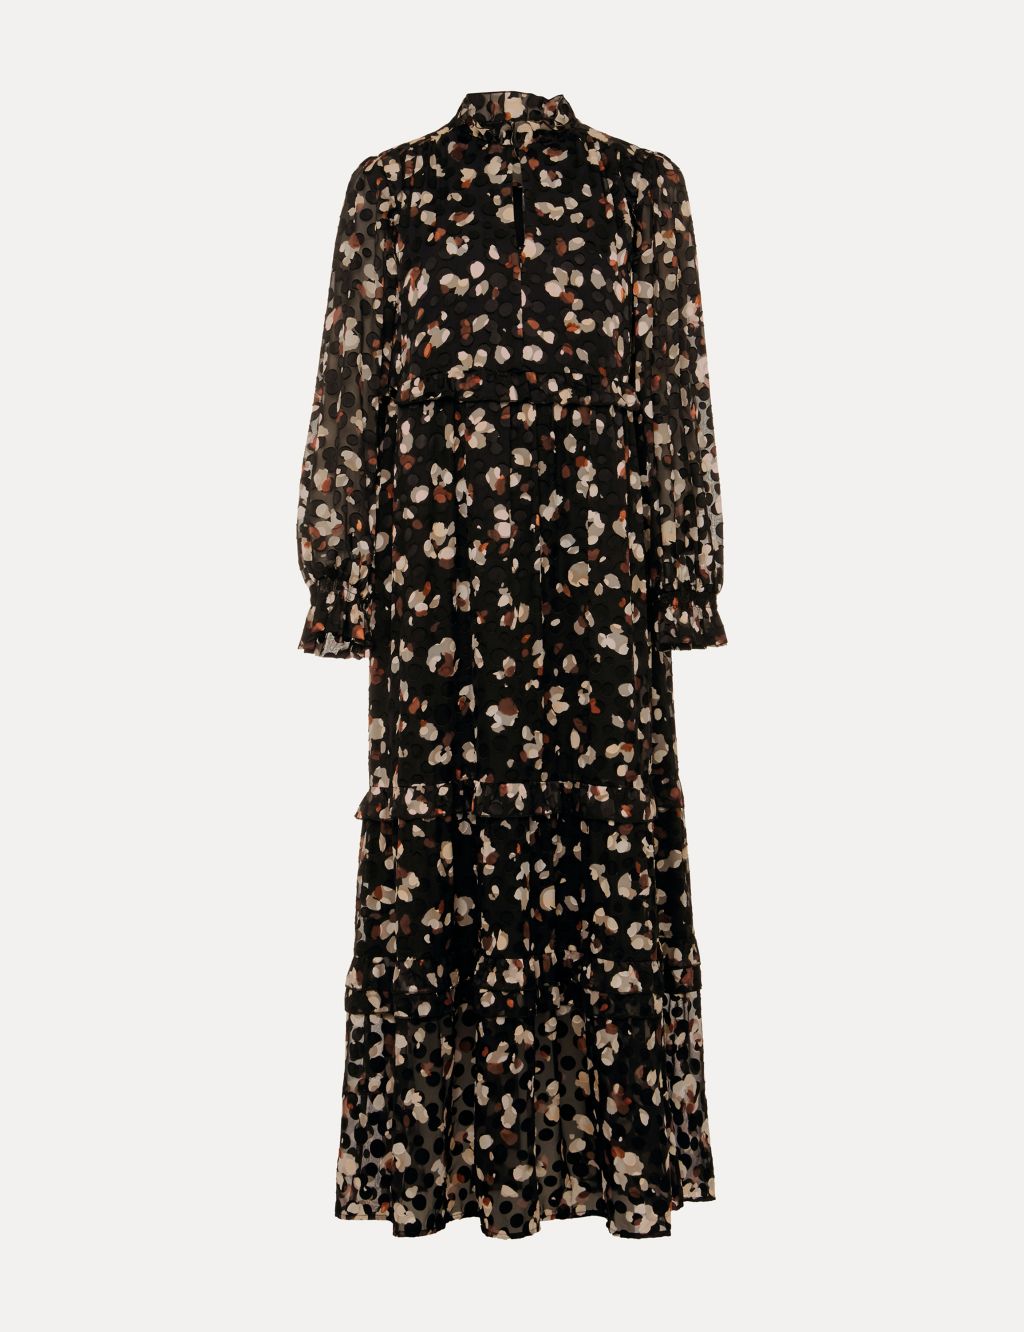 Printed Textured V-Neck Midaxi Tiered Dress image 2